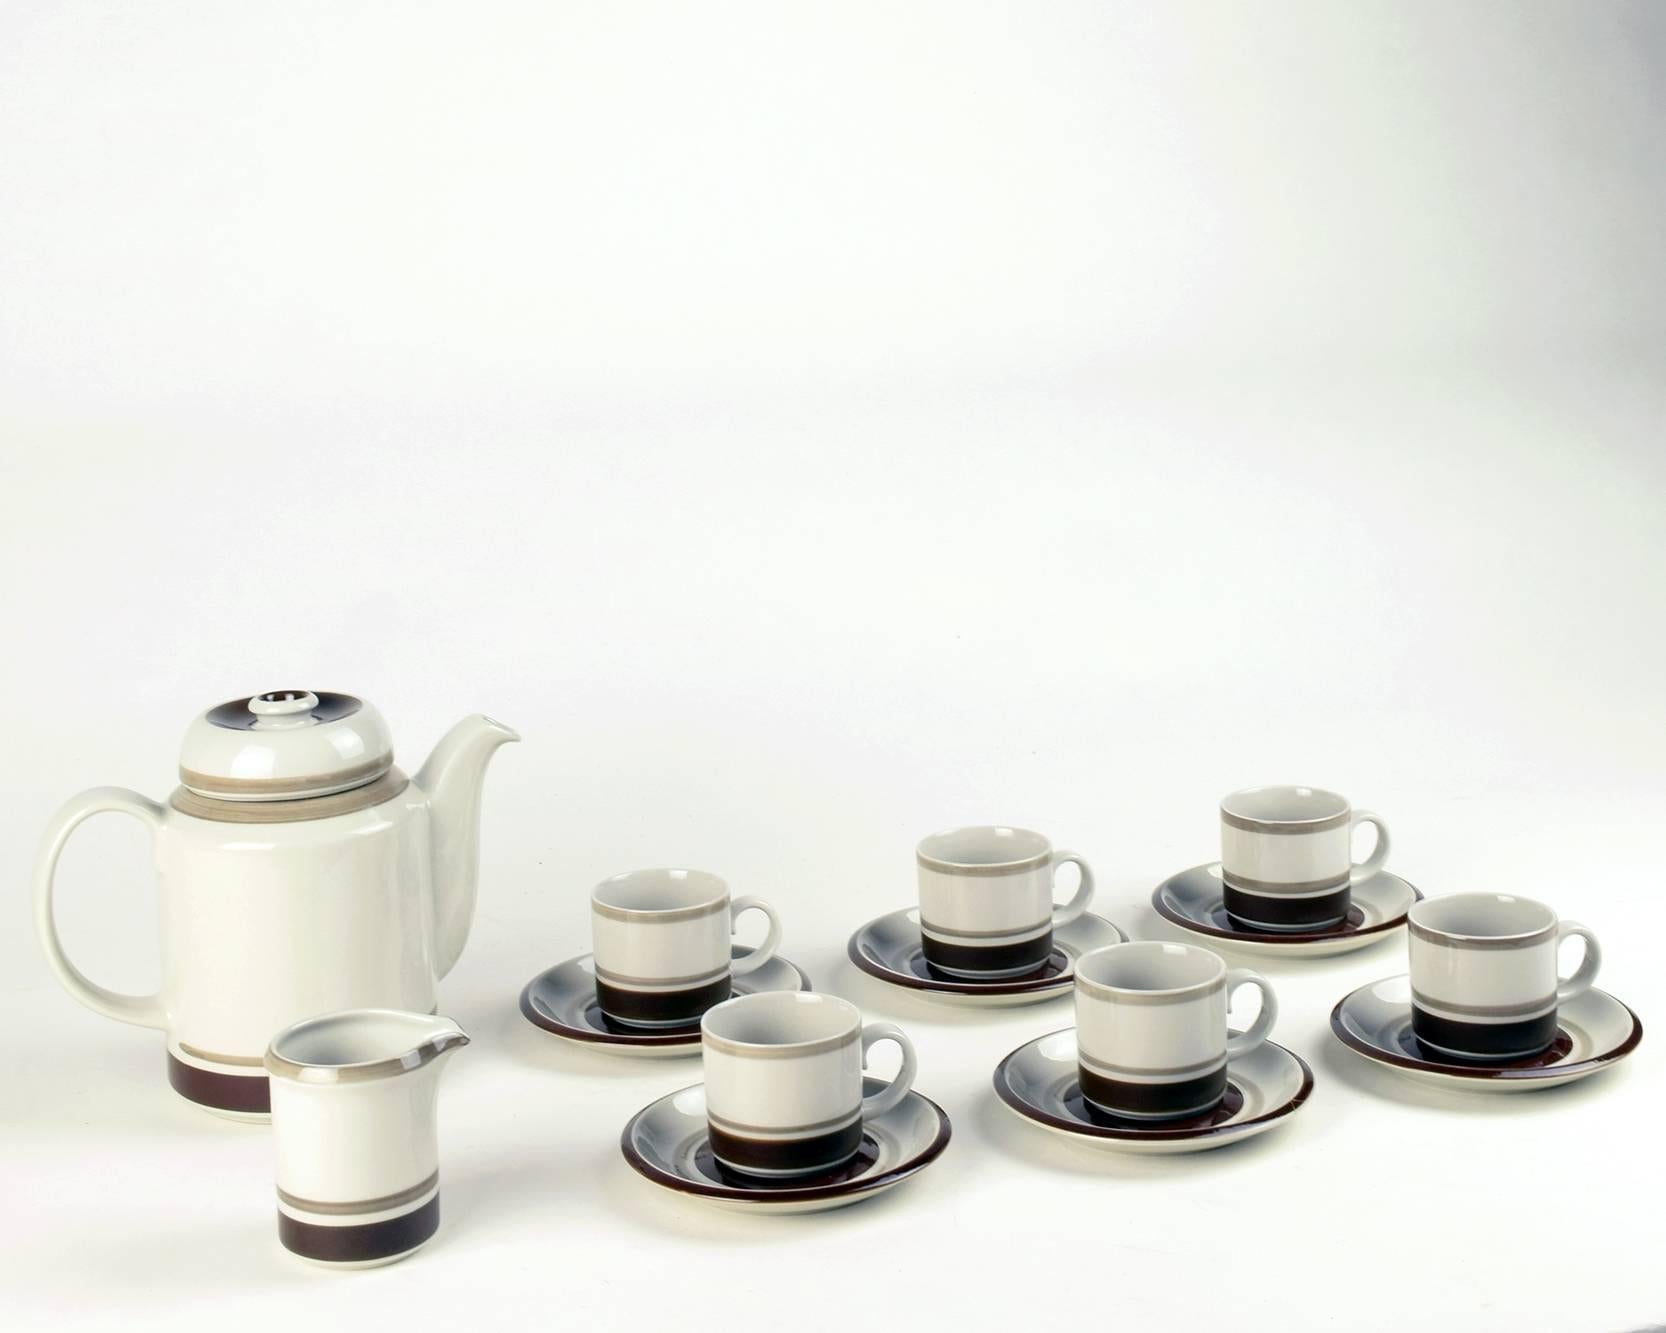 Raija Uosikkinen for Arabia,
'Pirtti' coffee set
Designed, circa 1970, manufactured, circa 1970-1980

Perfect condition showing virtually no signs of previous use.

Set comprises:
Coffee pot + lid
Milk jug
Sugar bowl + lid (not showing in